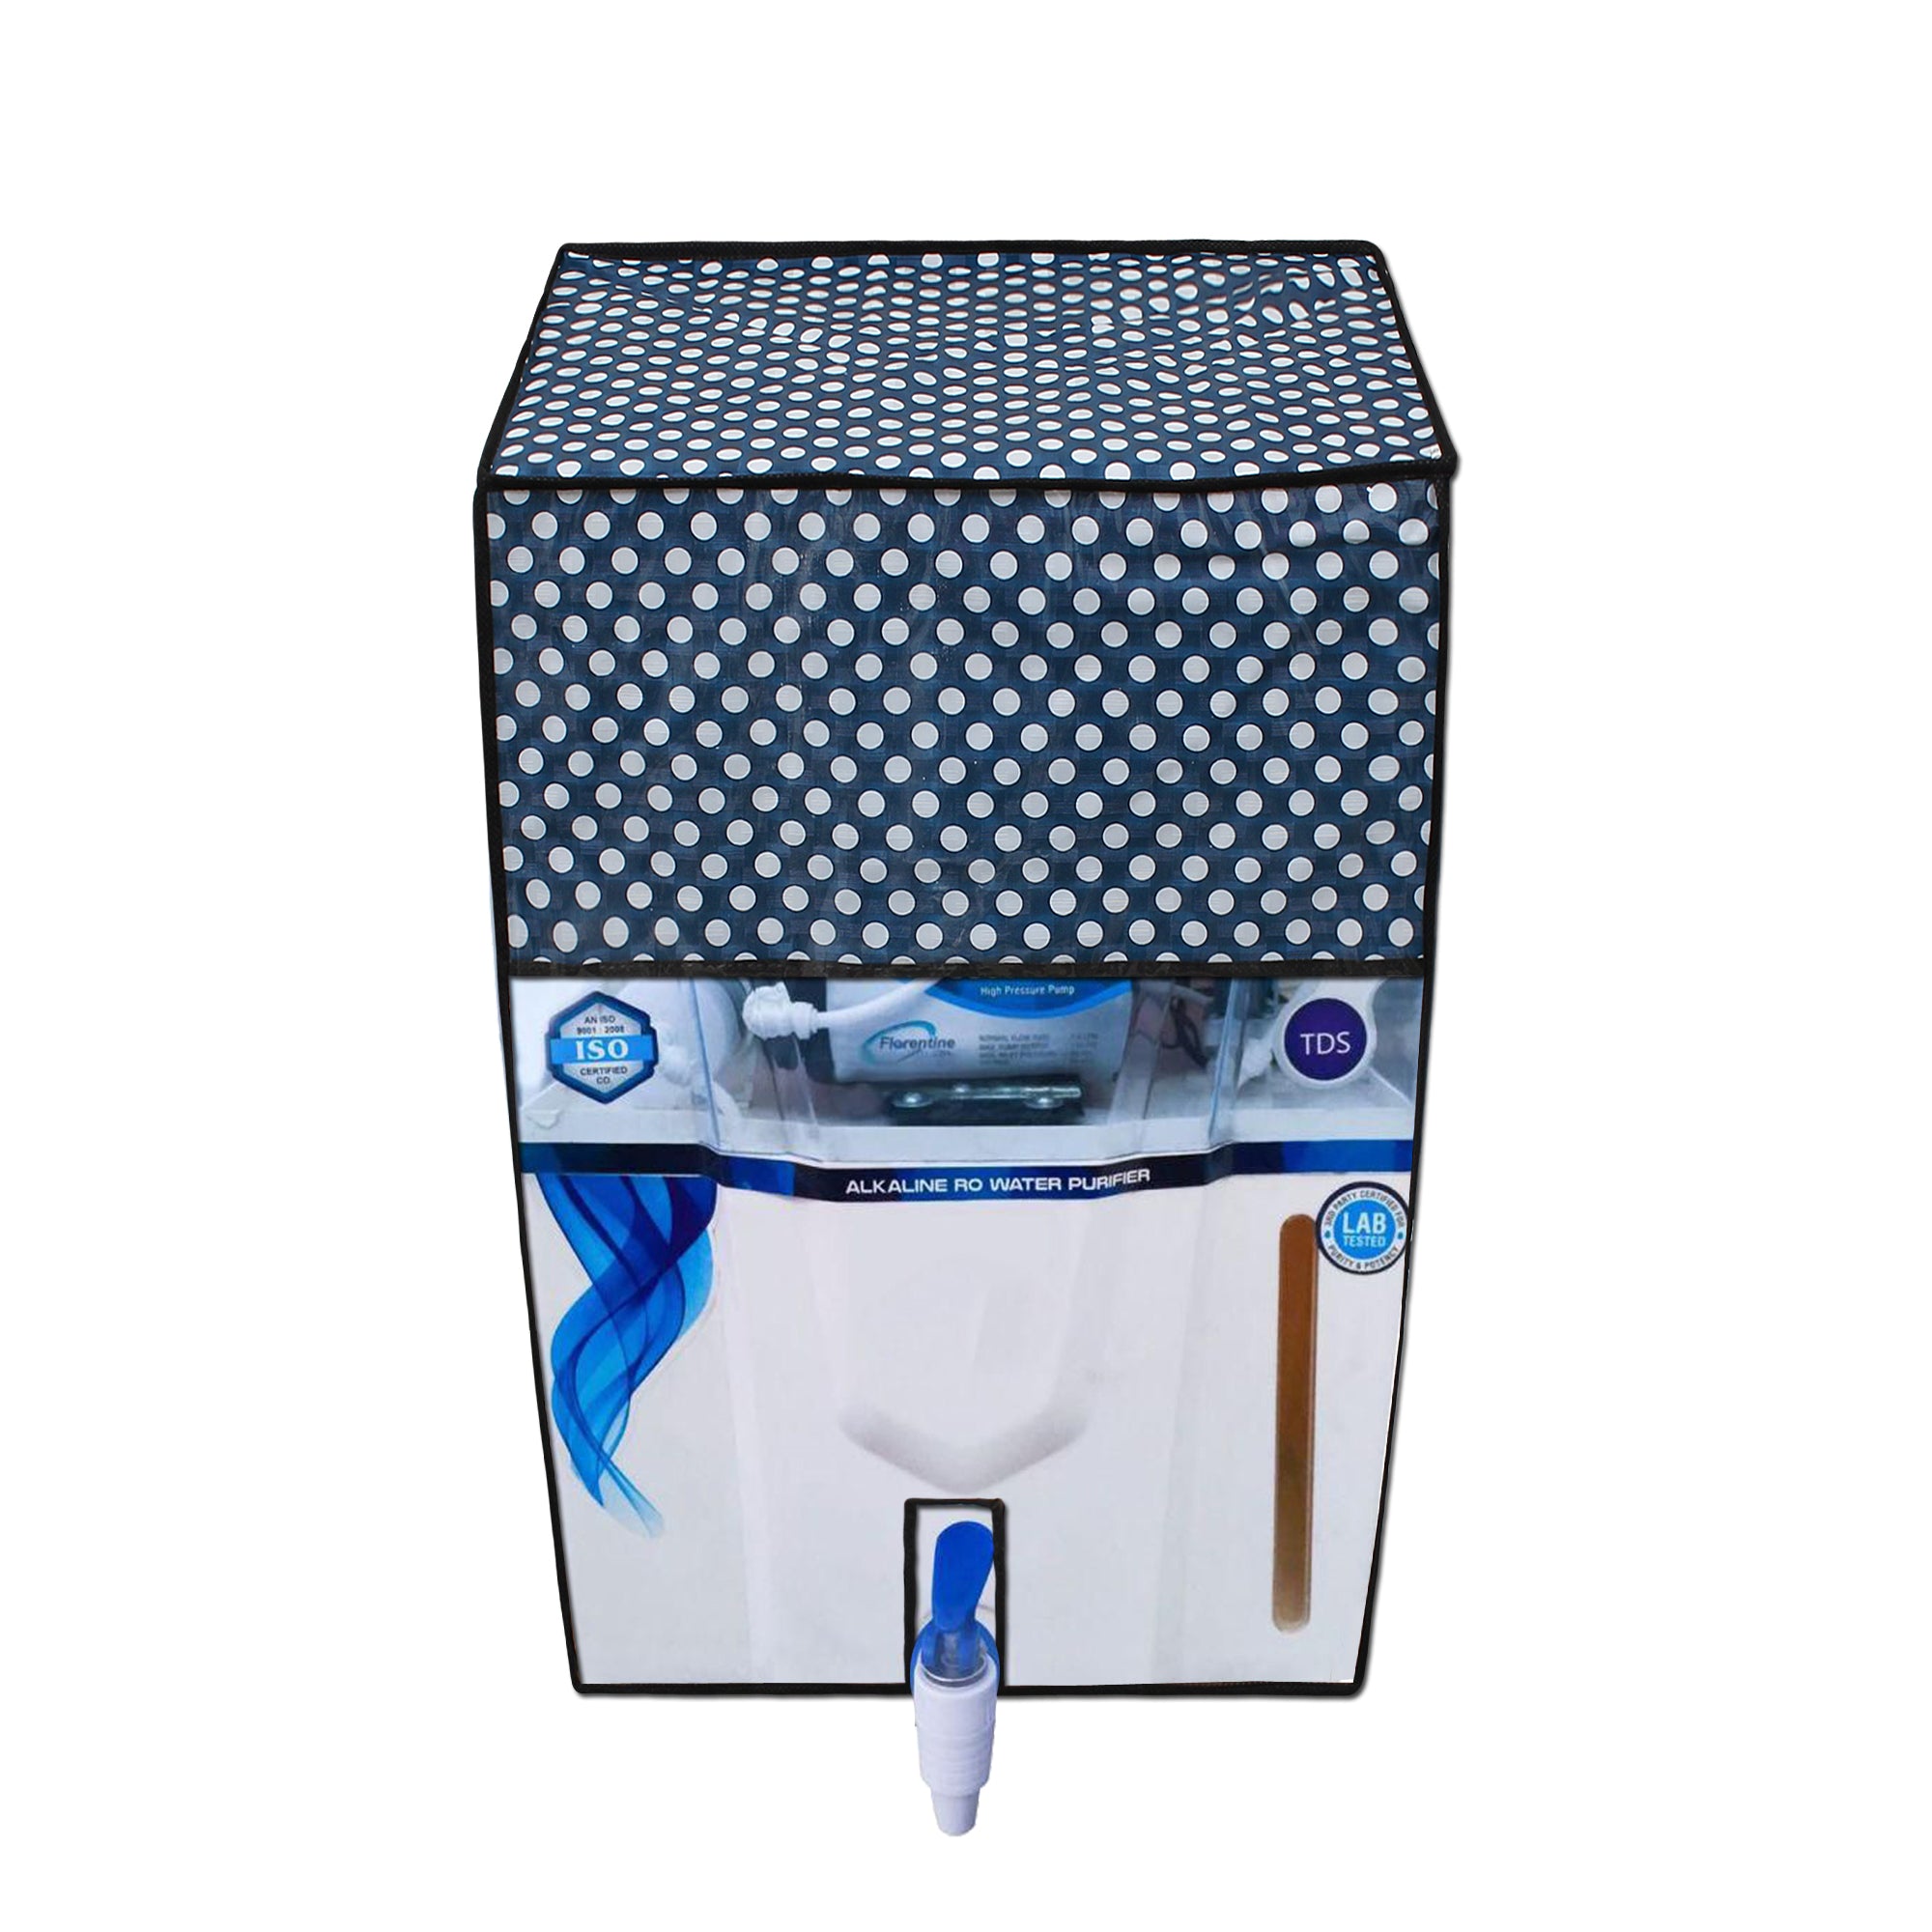 Waterproof & Dustproof Water Purifier RO Cover, SA47 - Dream Care Furnishings Private Limited